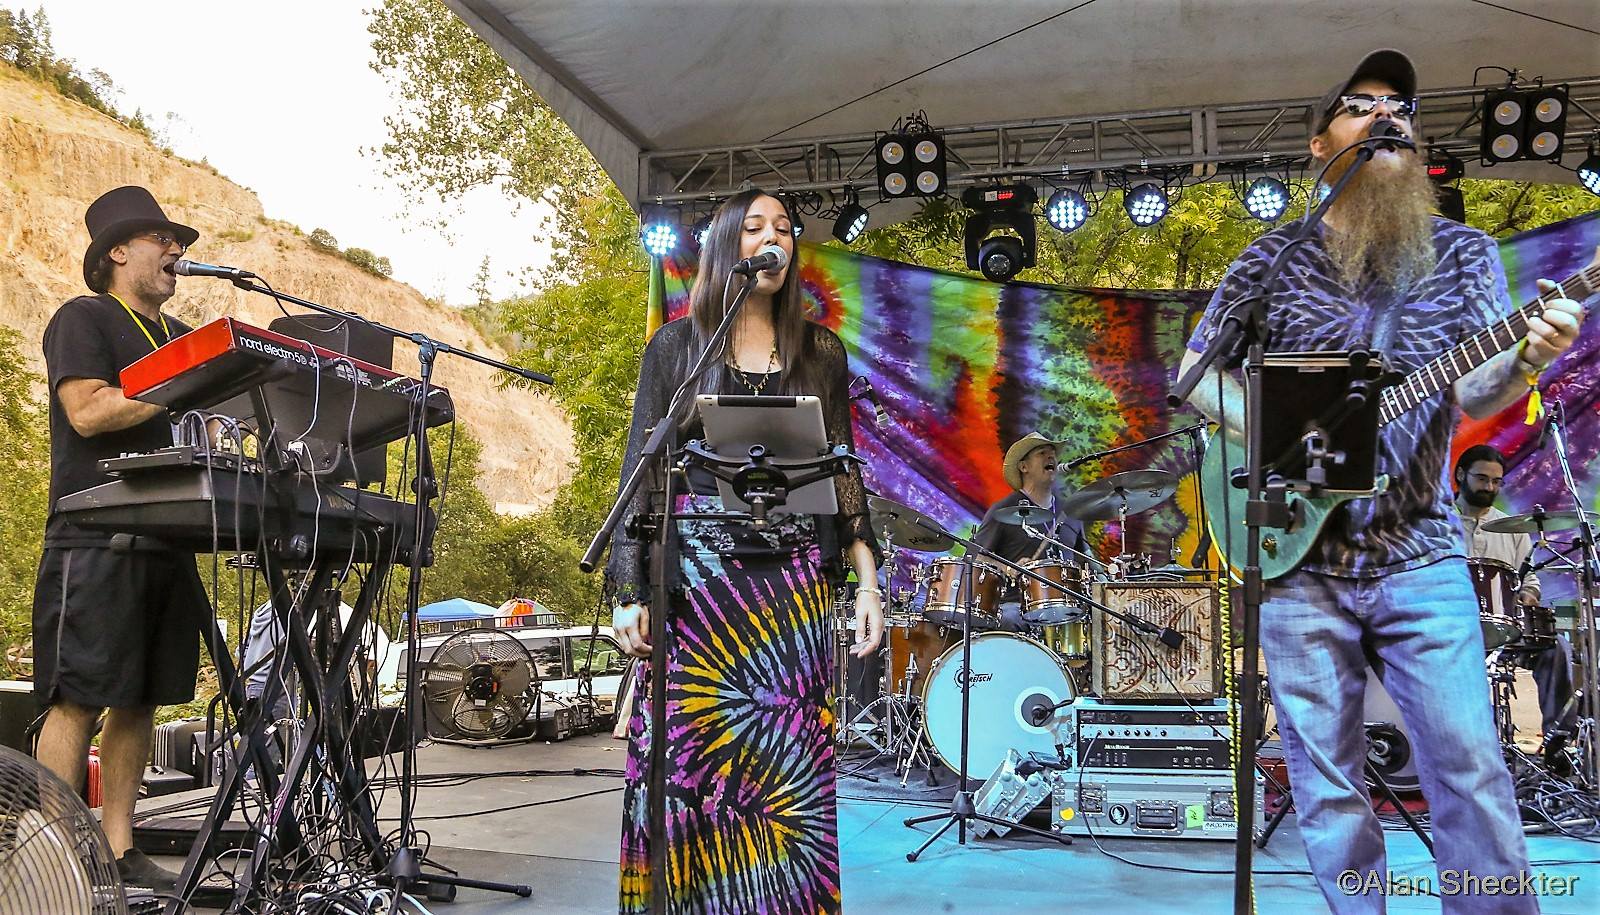 ordan Feinstein, Jeannette Ferber & Jonny "Mojo" Flores of the Band Beyond Description perform by the South Fork of the American River